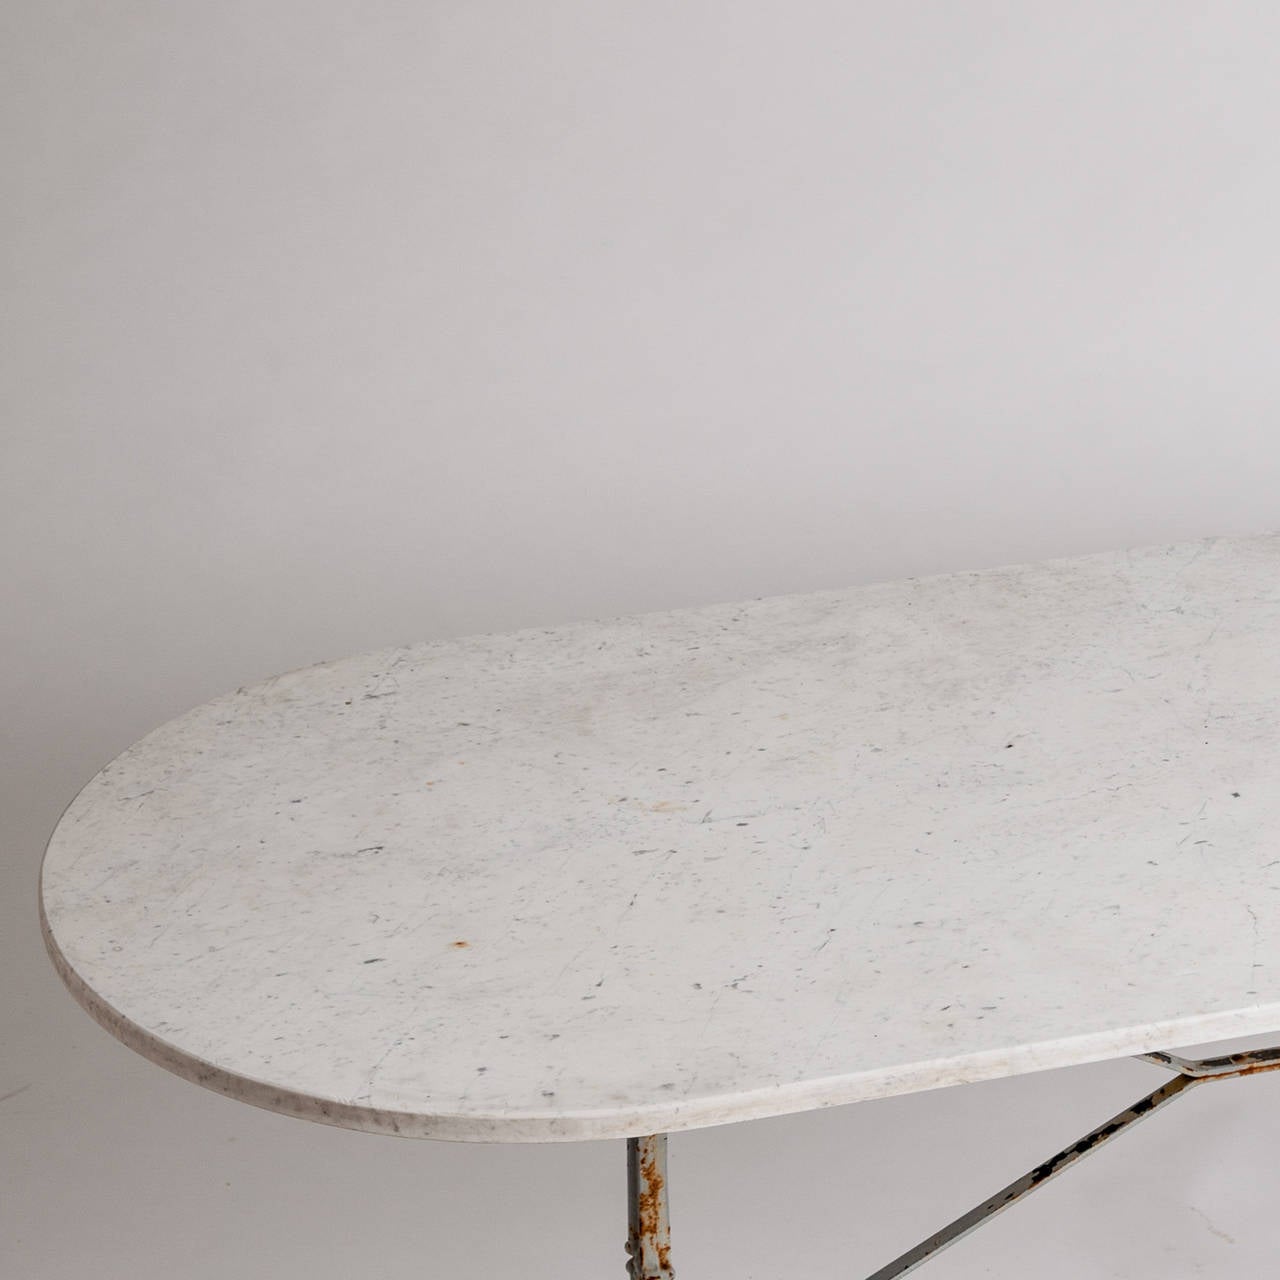 This French bistro table with an elegant oval marble top is a perfect size for dining and can easily sit six people. The antique cast iron base is painted a pale blue/grey and has nice pad feet that lend stability. The marble is in good condition.